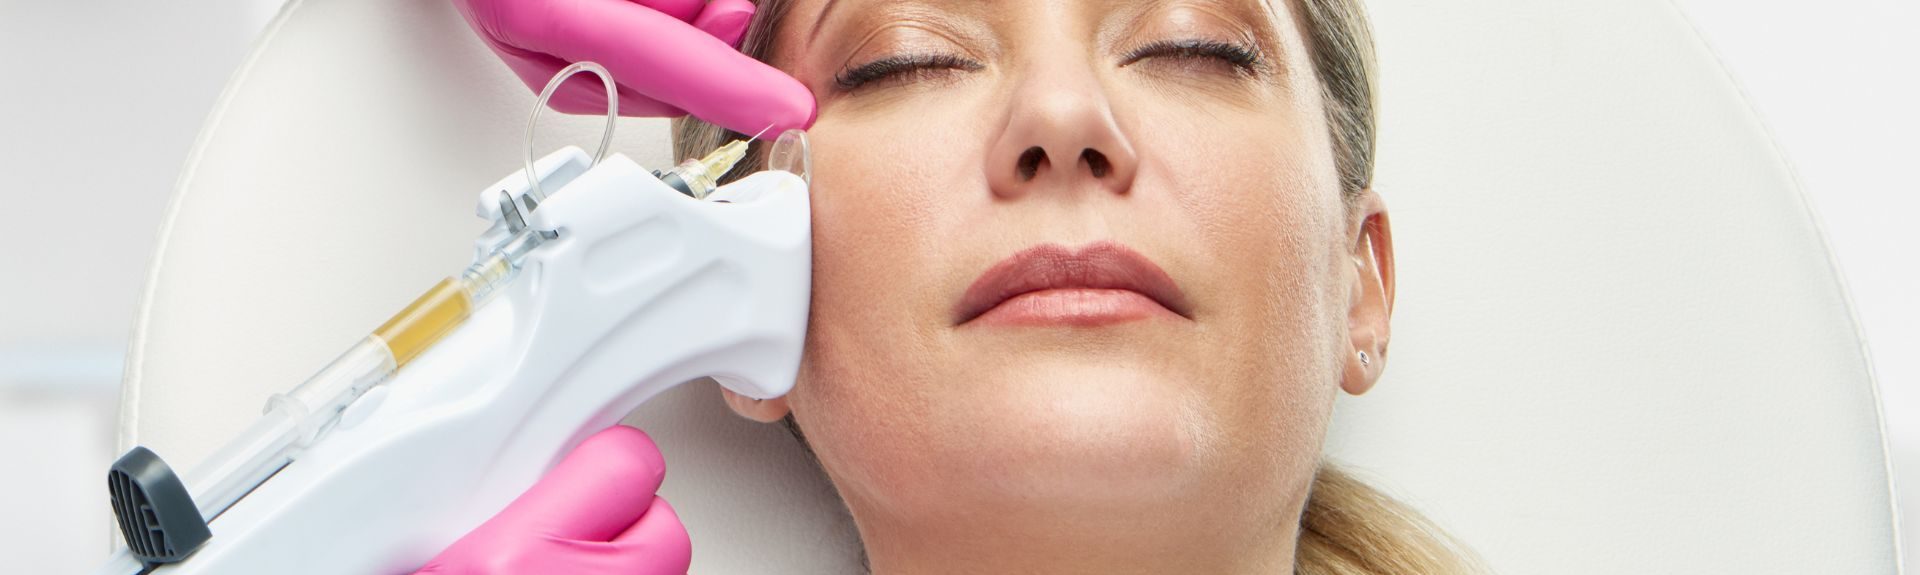 The Role Of Botox In Aesthetic Medicine